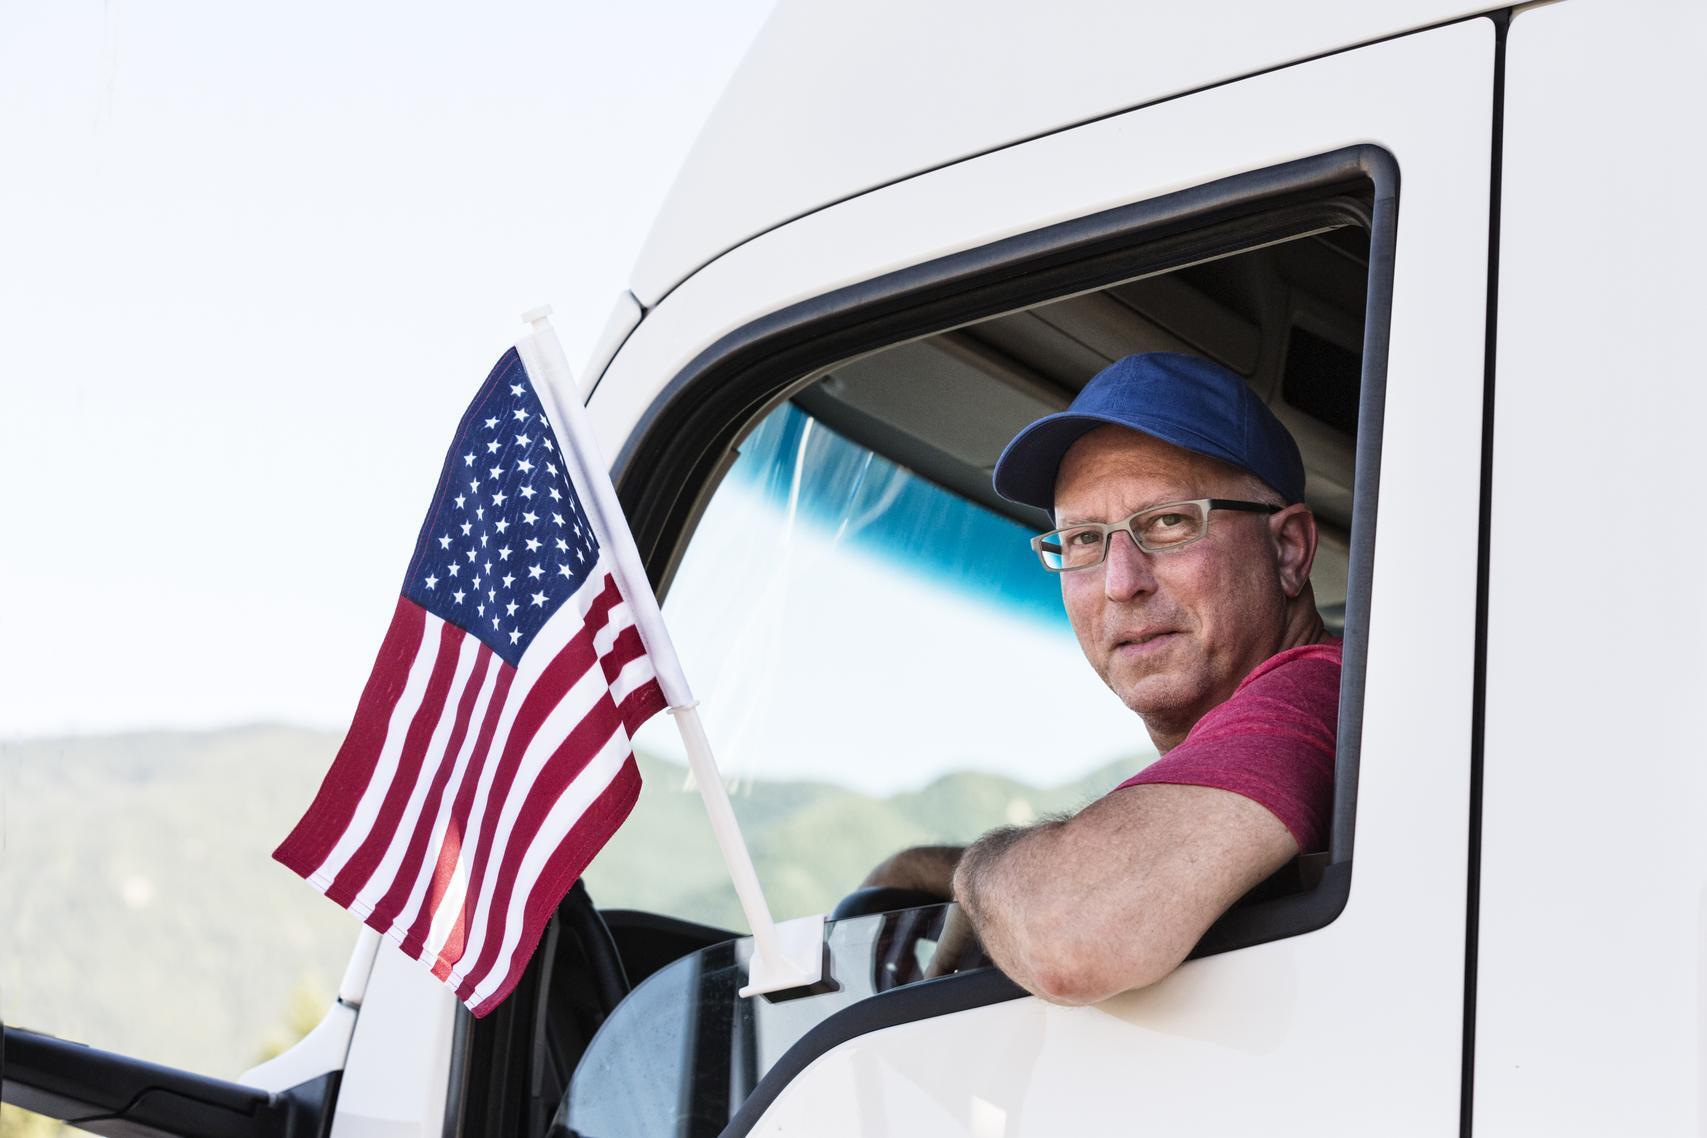 Truckers pay high diesel prices in New Jersey because of our dependence on foreign oil.